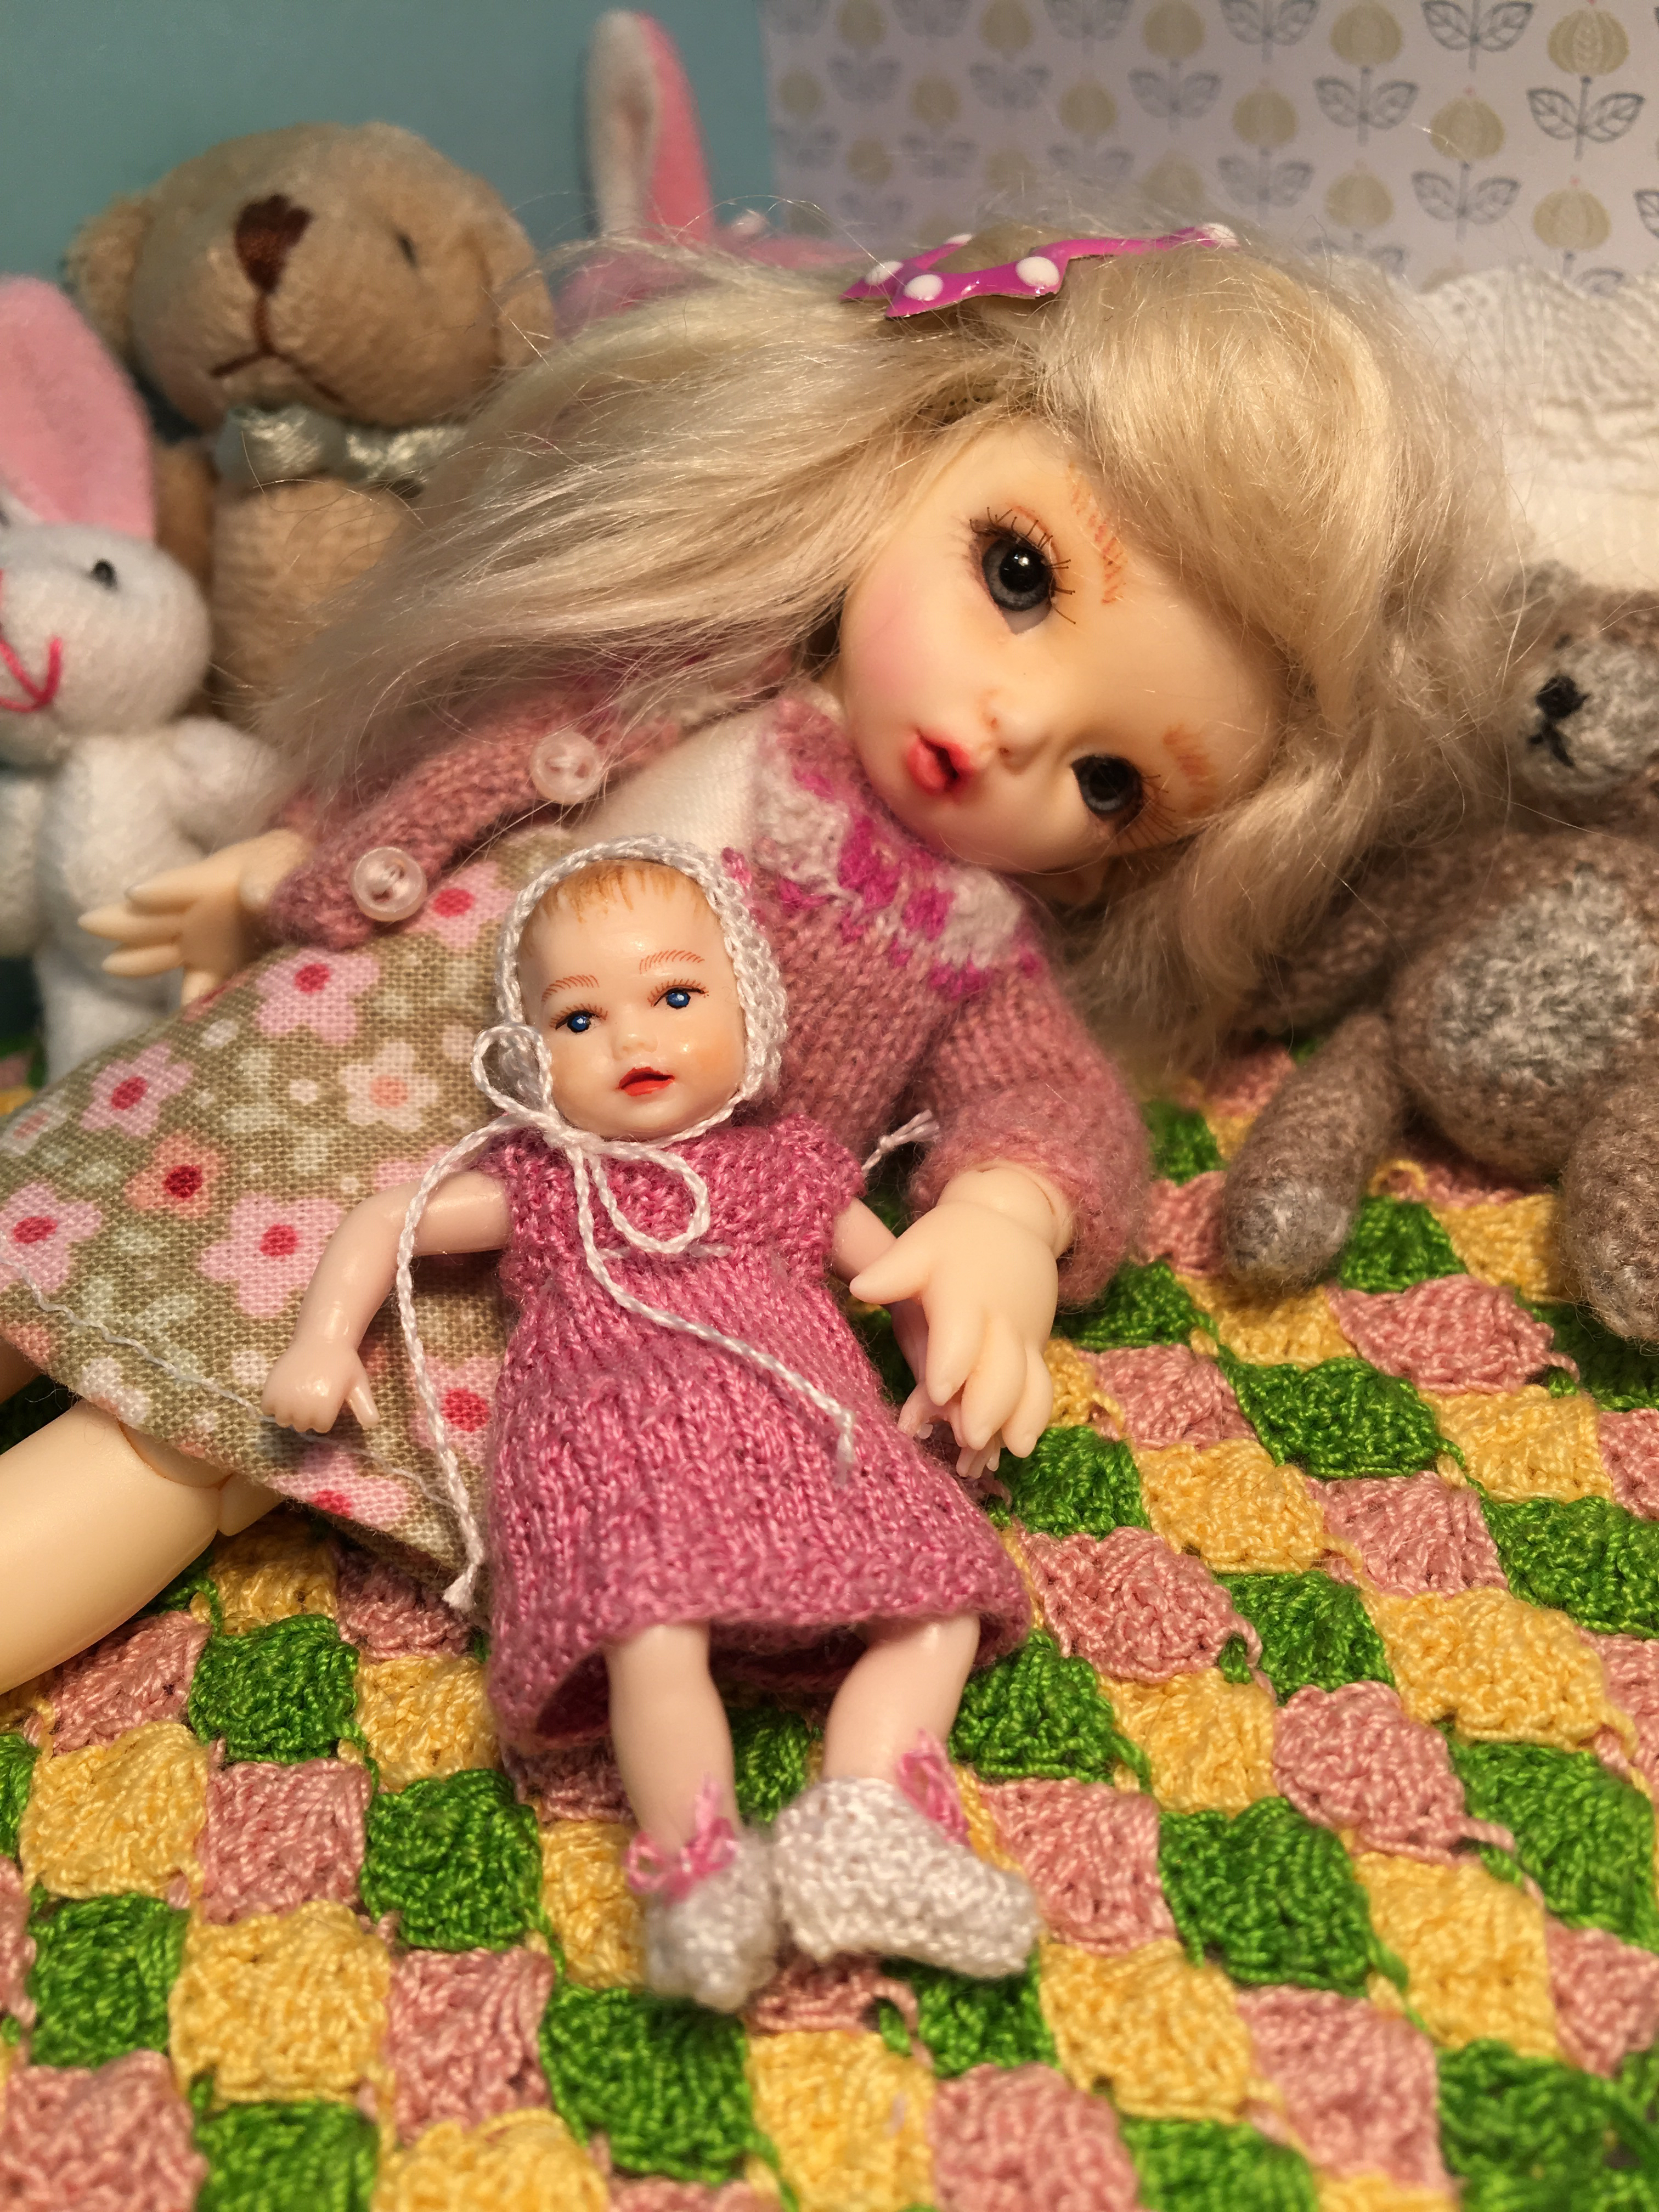 Nap time for little dolls and dollies